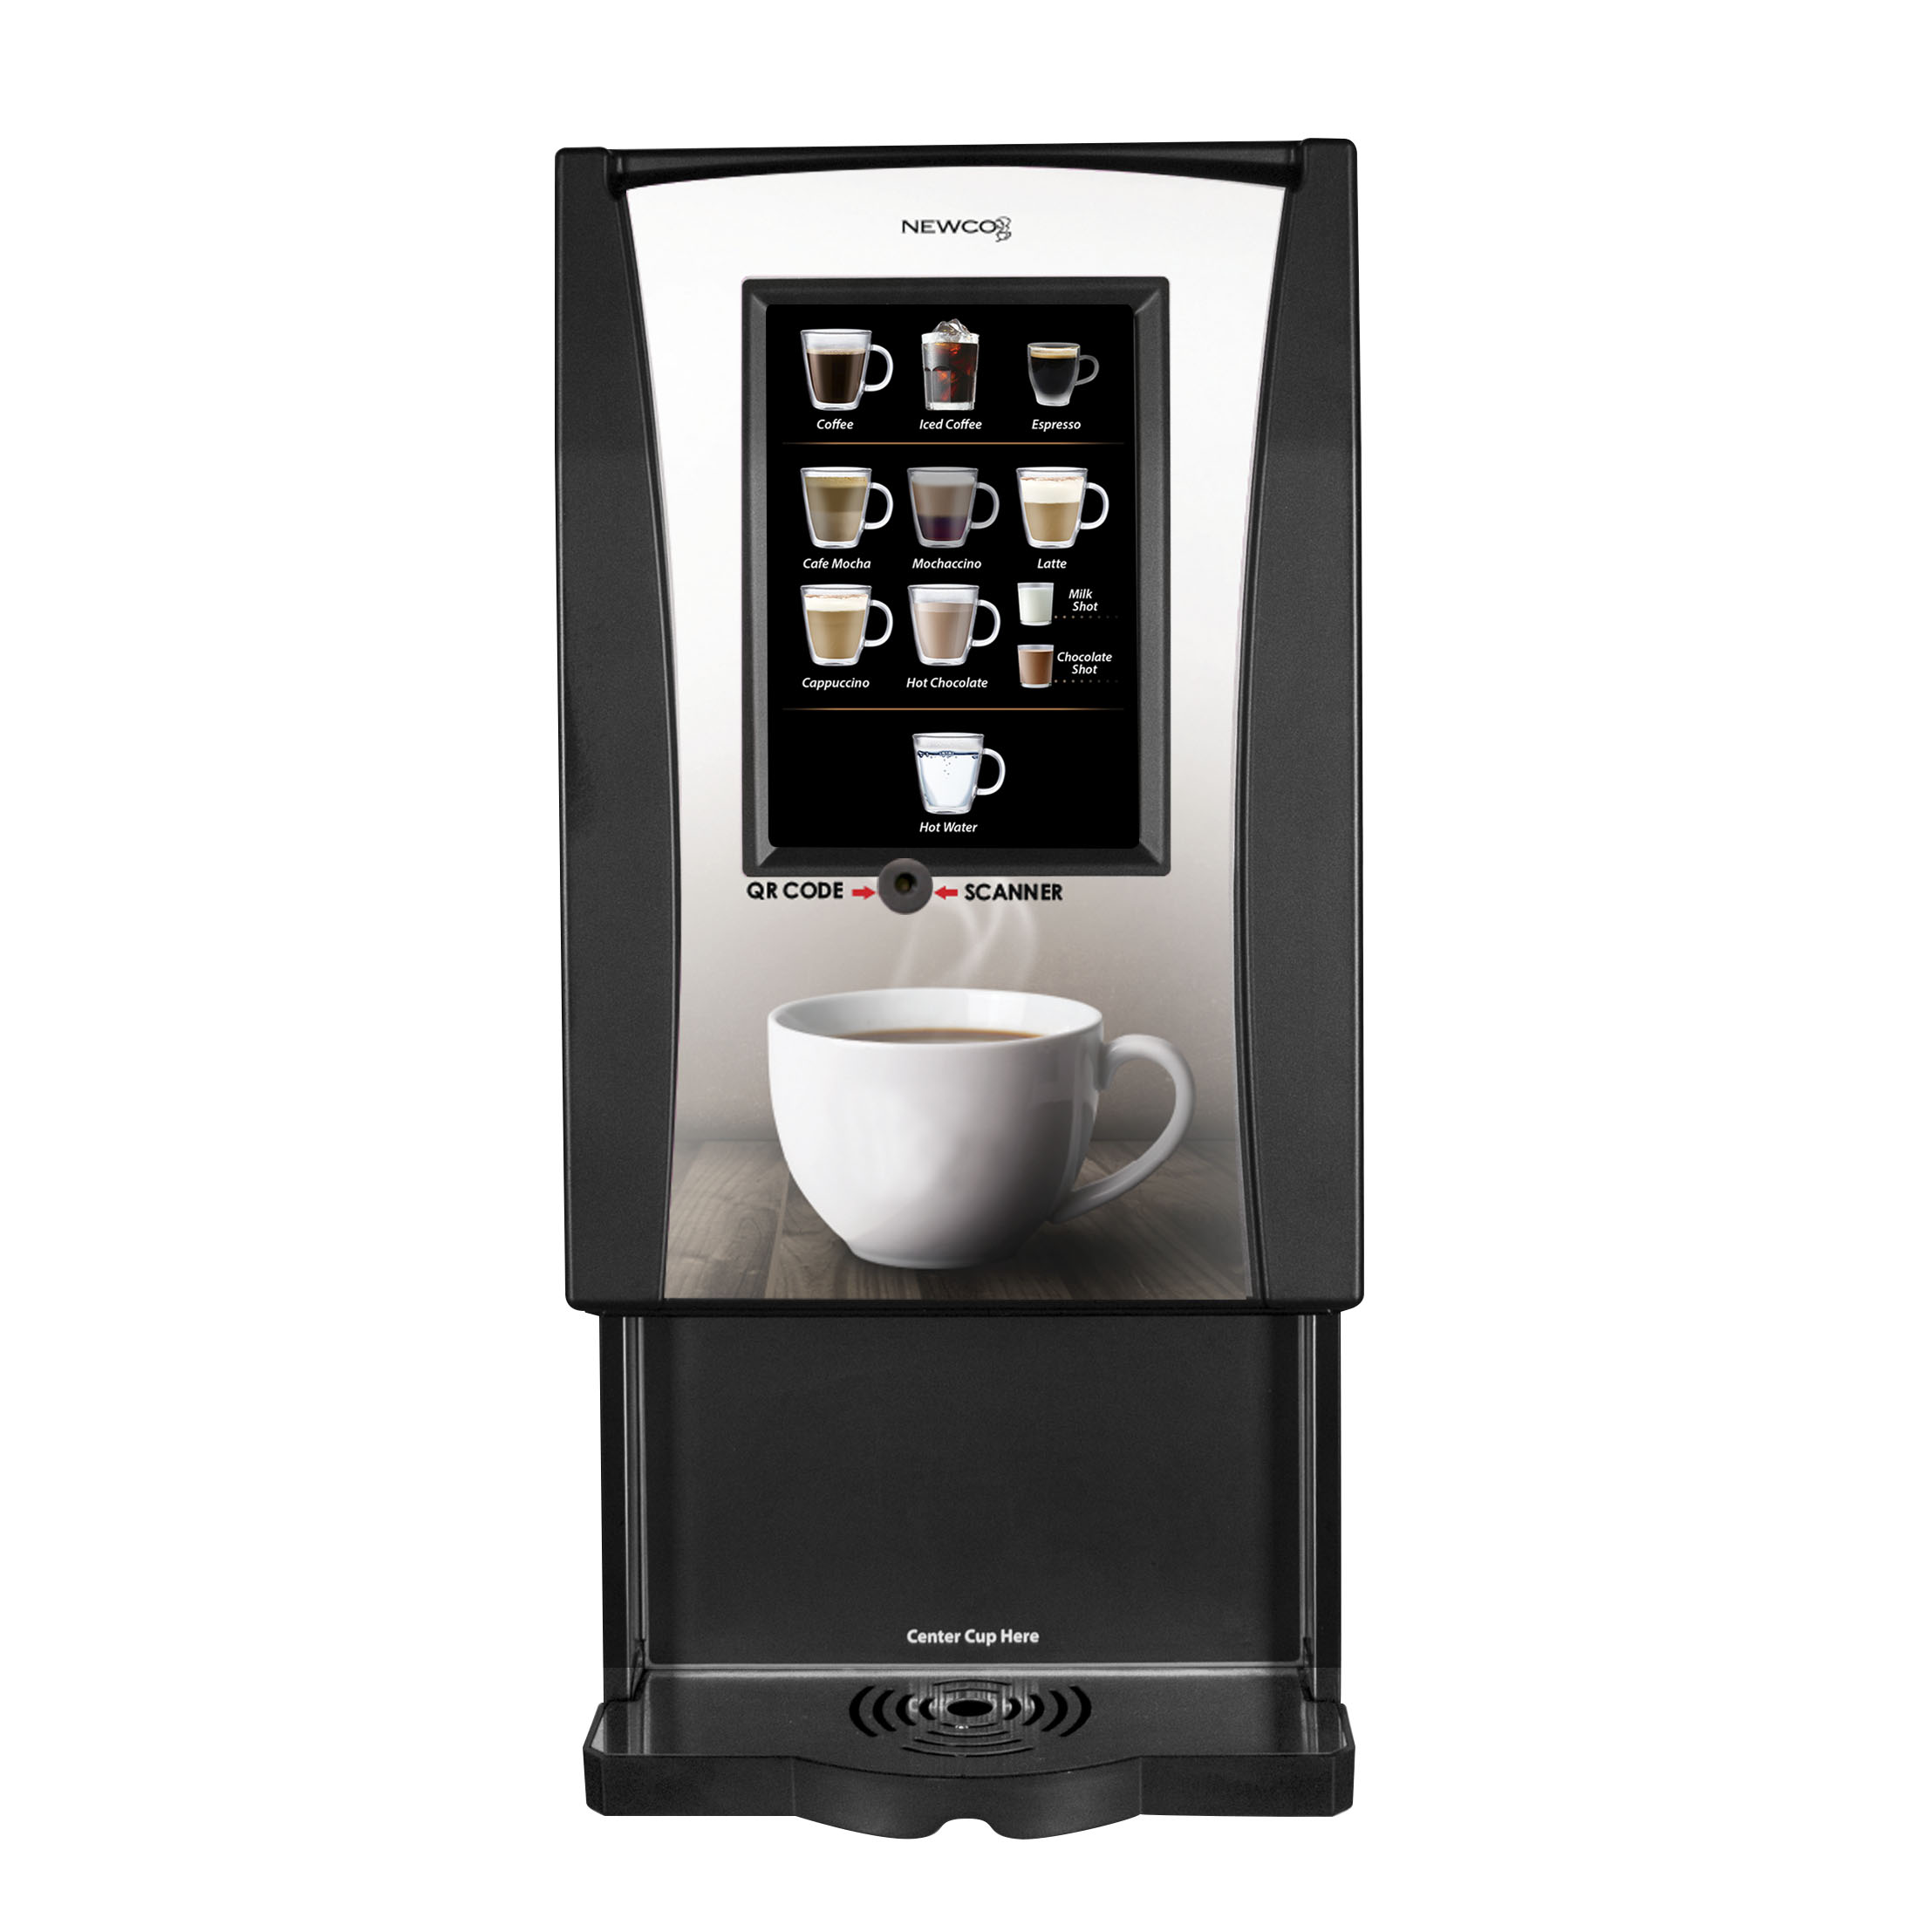 How to select the best office coffee or coffee vending machine